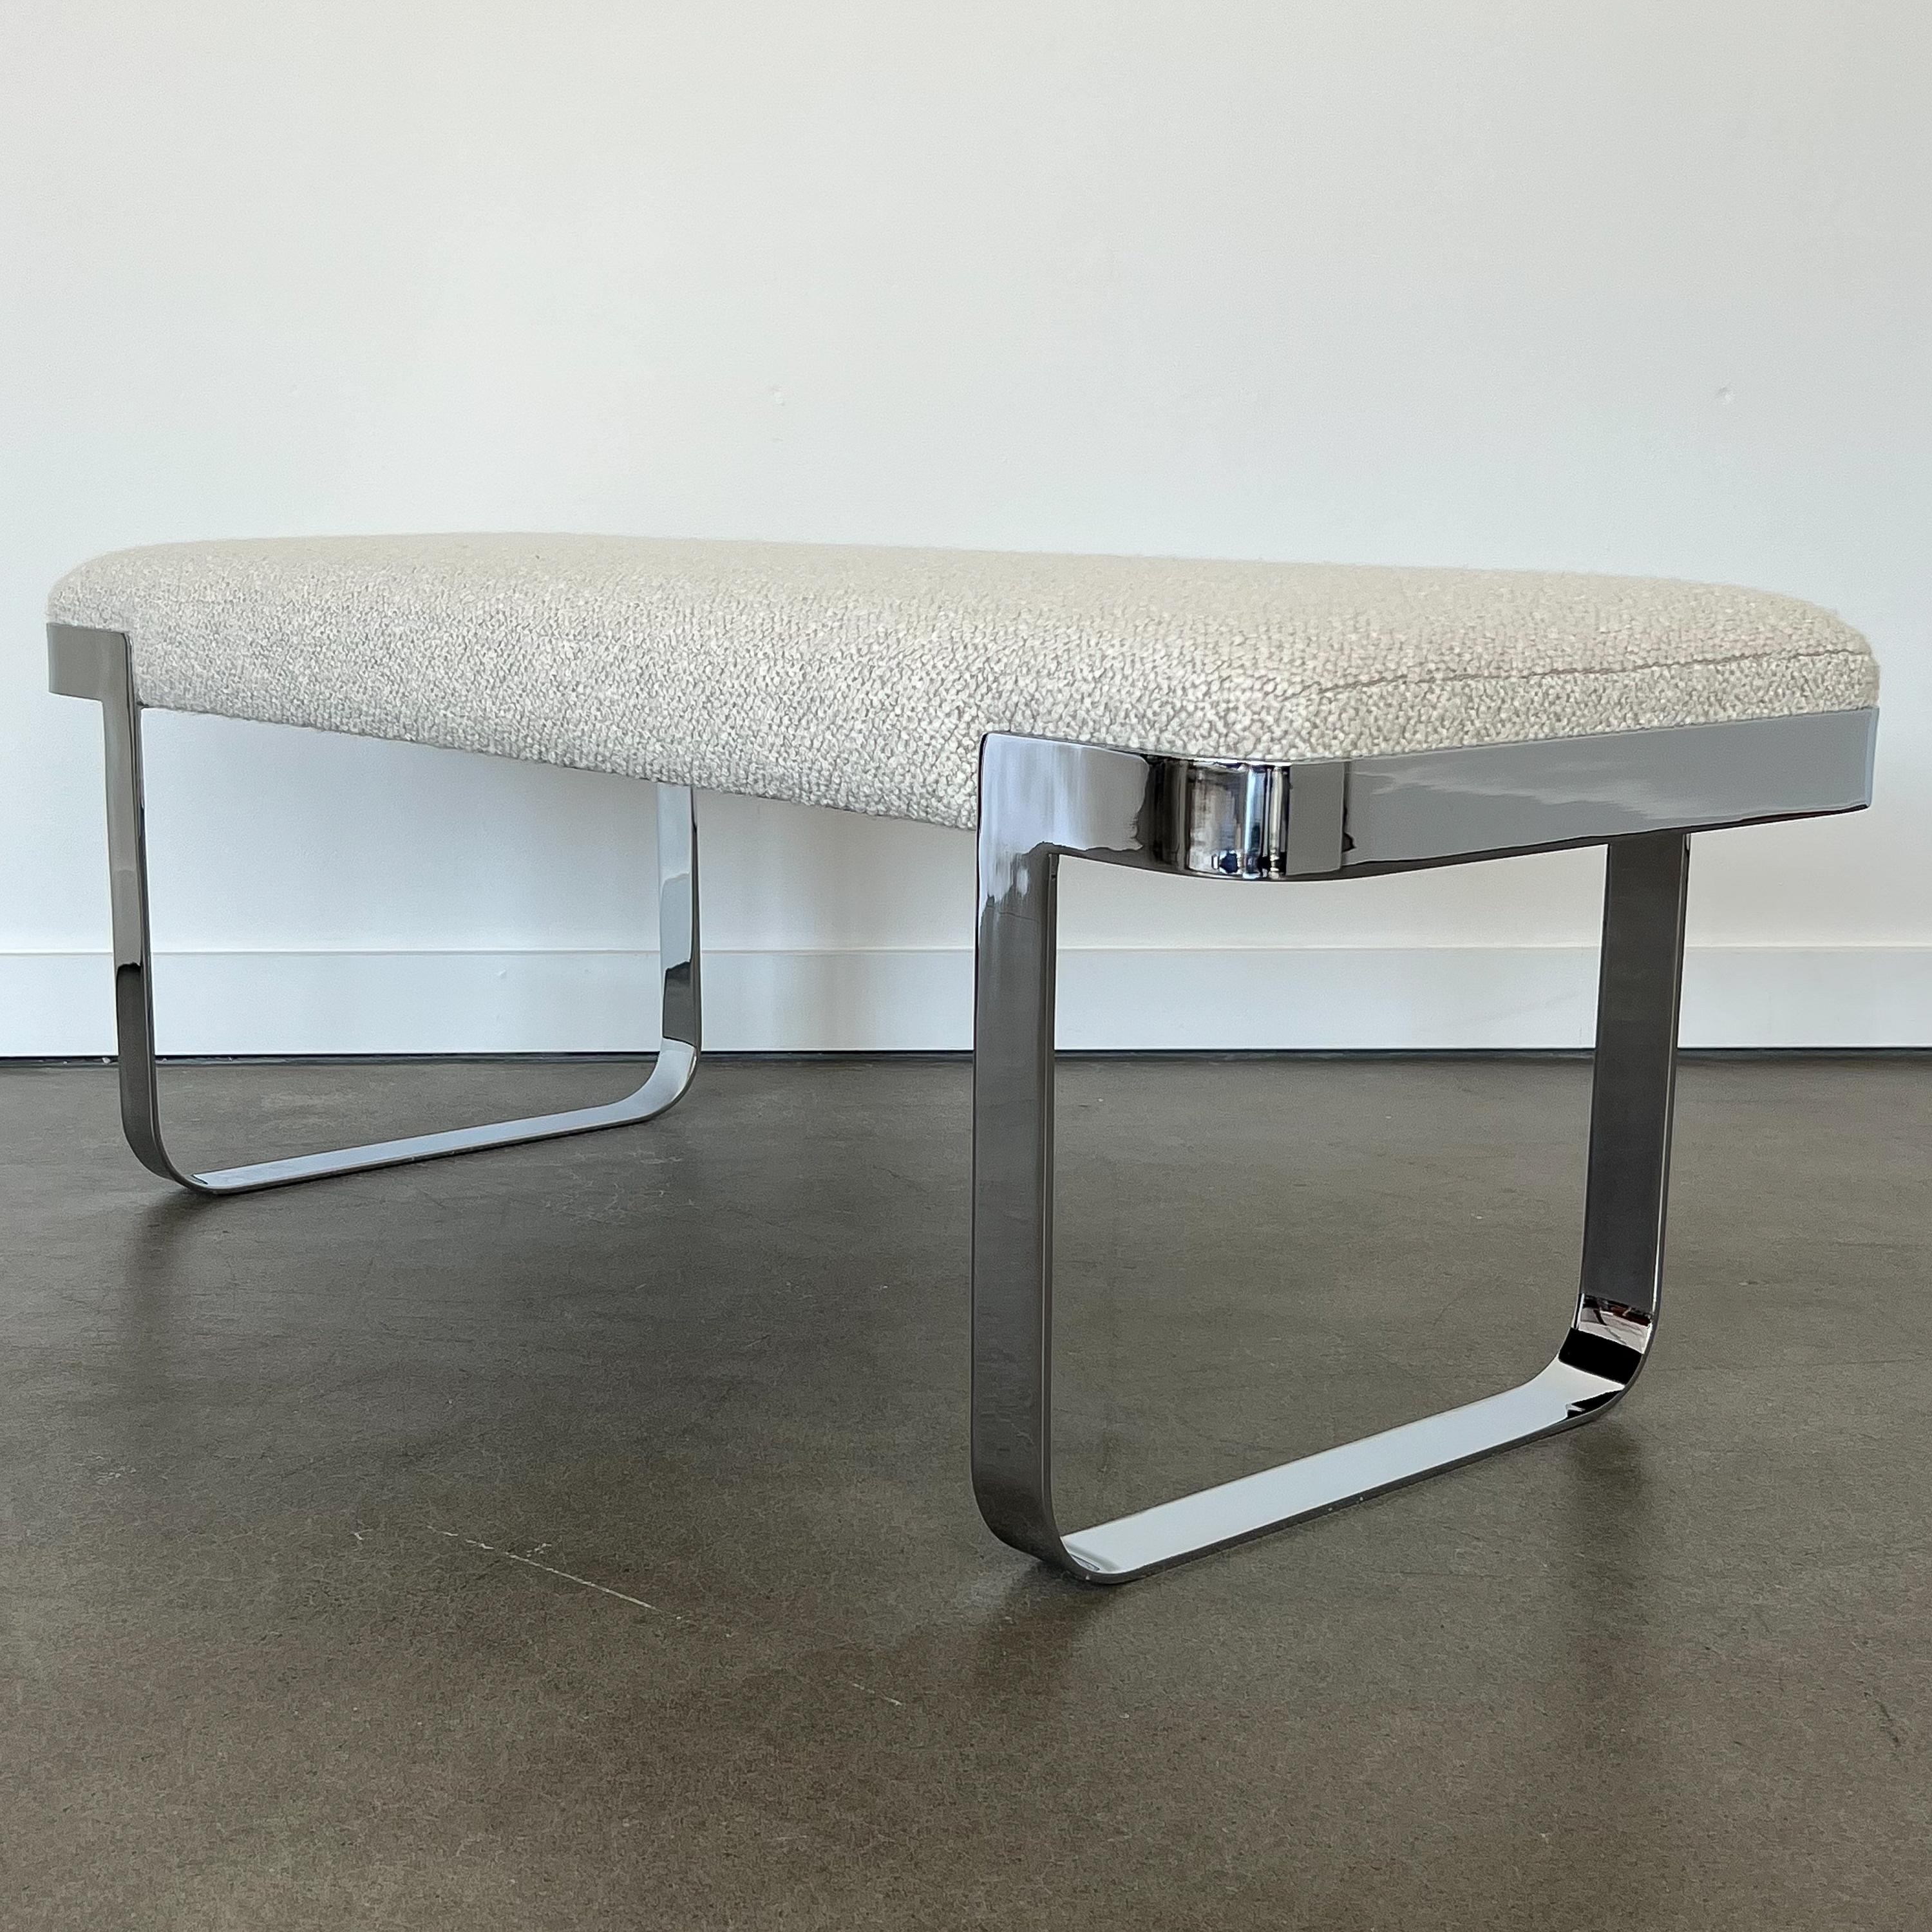 Plated Milo Baughman Style Chrome Bench by Tri-Mark in Pierre Frey Bouclé